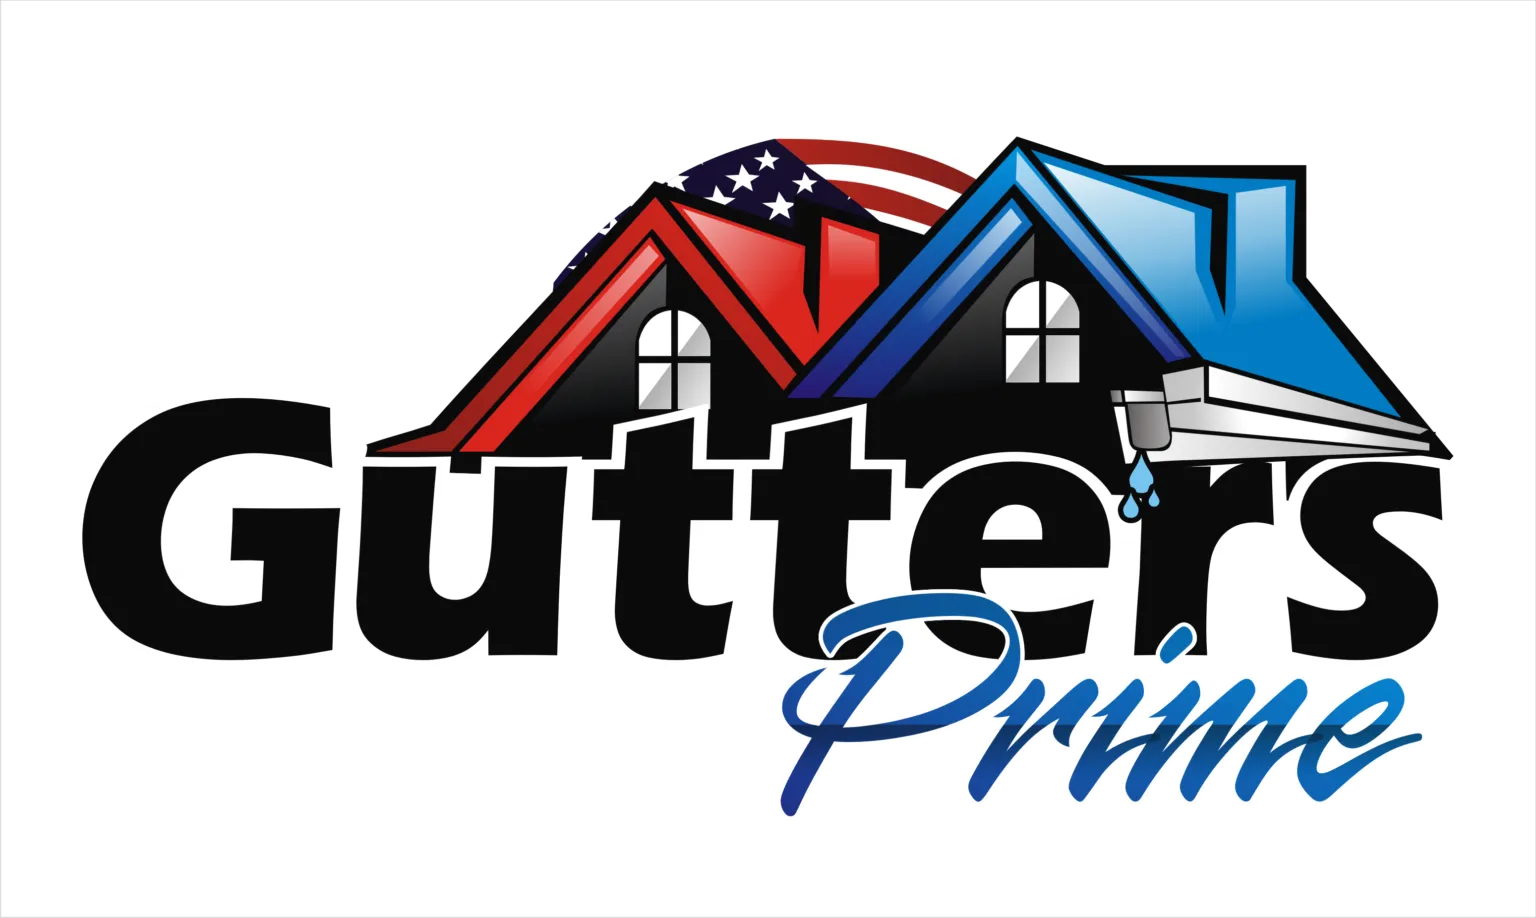 Professional Gutter Services and Solutions, Gutters Prime gutter north carolina